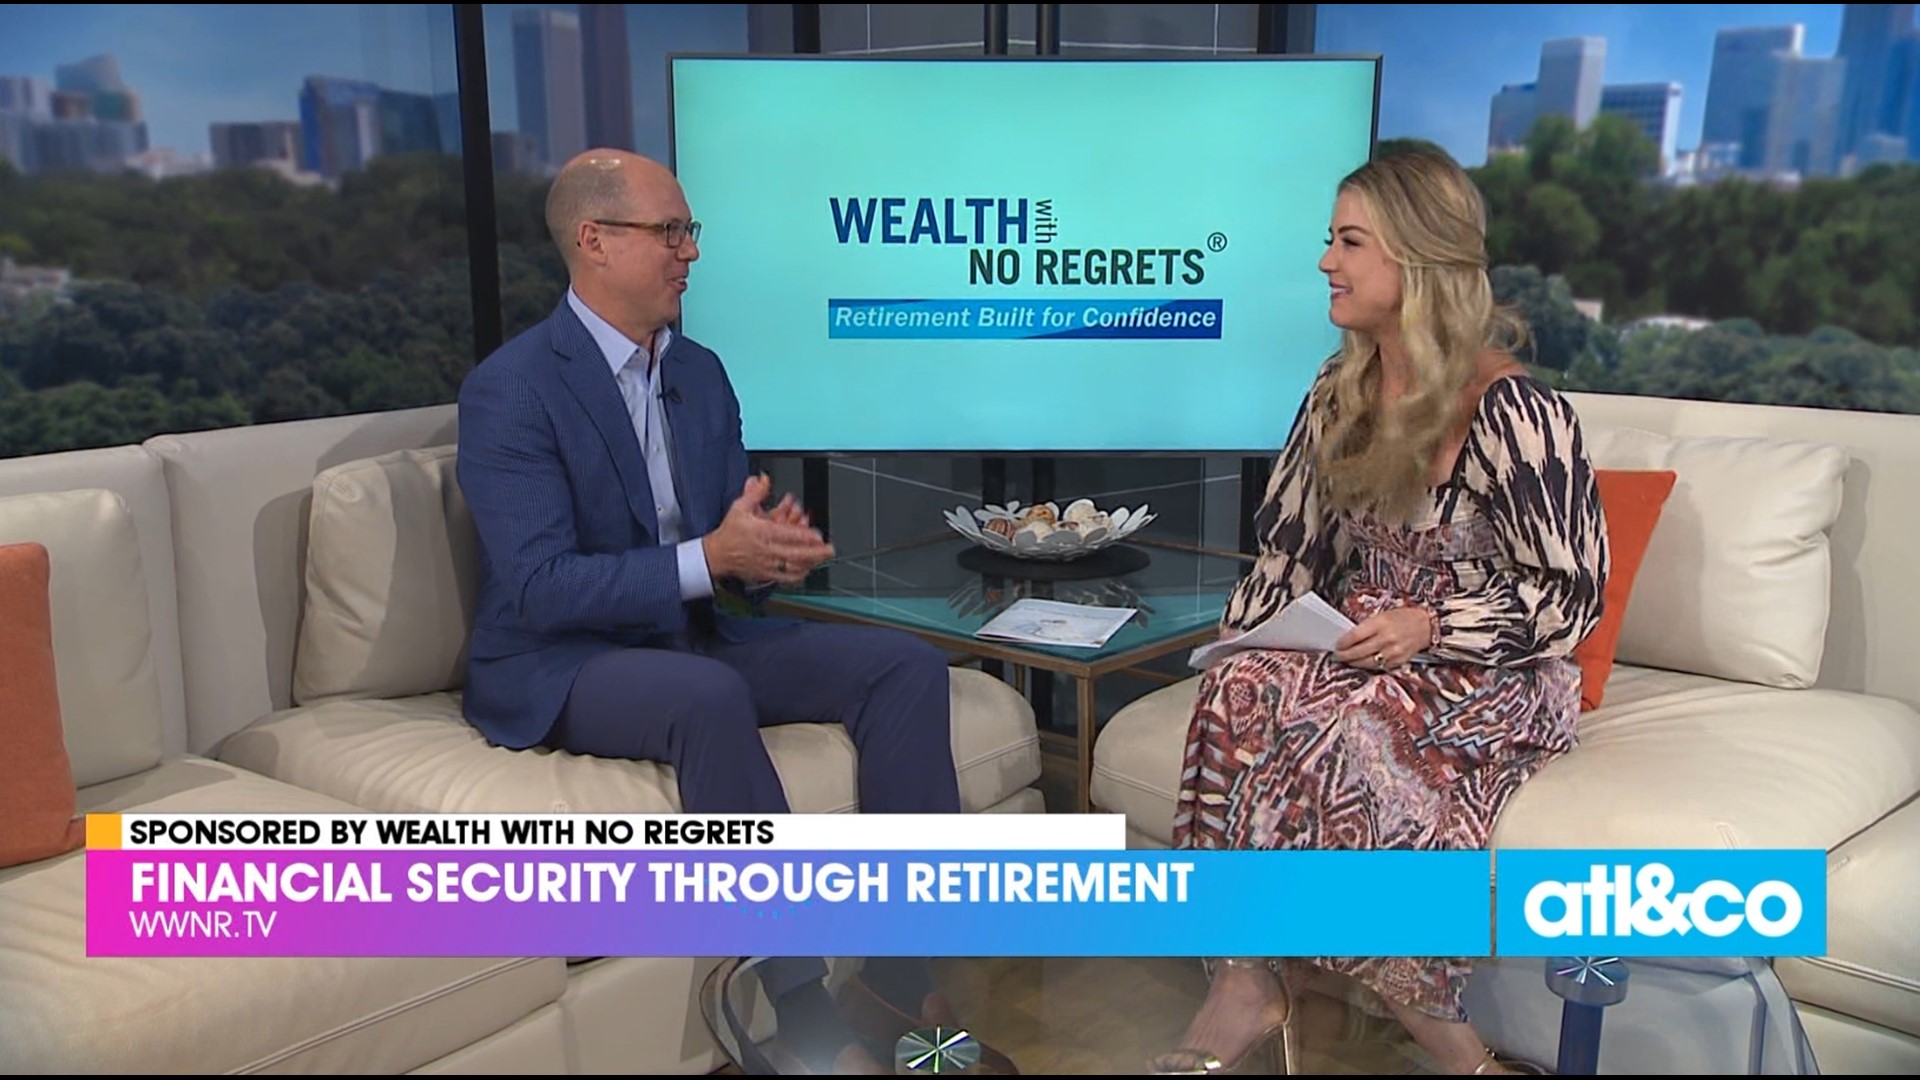 Let Barry and his team at Wealth with No Regrets get you on track for financial freedom into retirement. Learn more at WWNR.tv